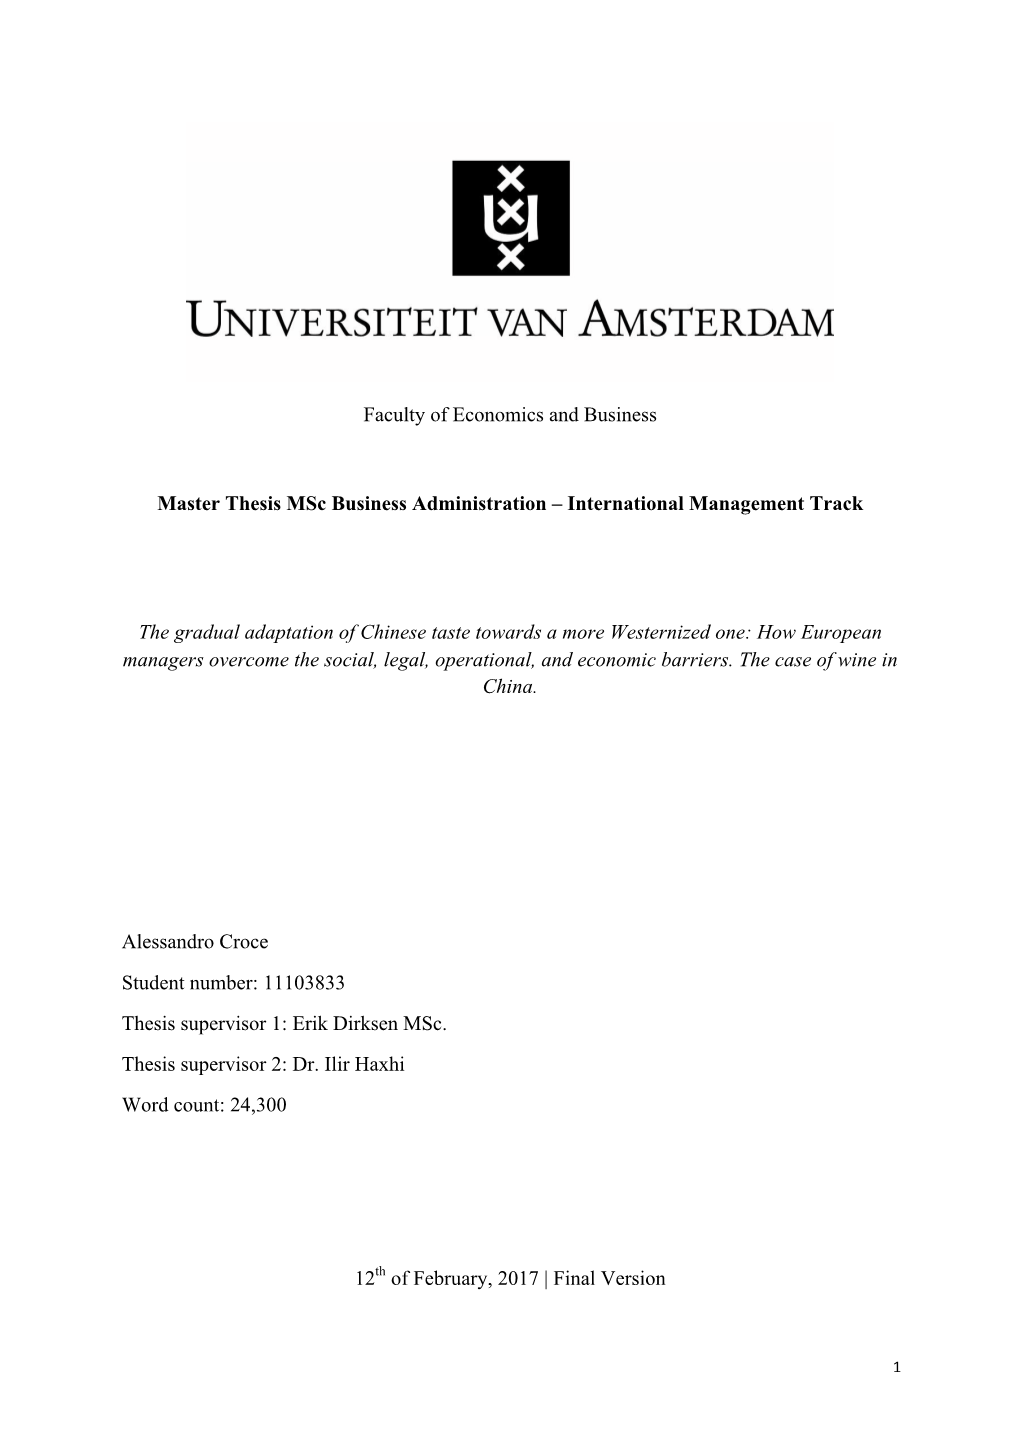 Faculty of Economics and Business Master Thesis Msc Business Administration – International Management Track the Gradual Adapt